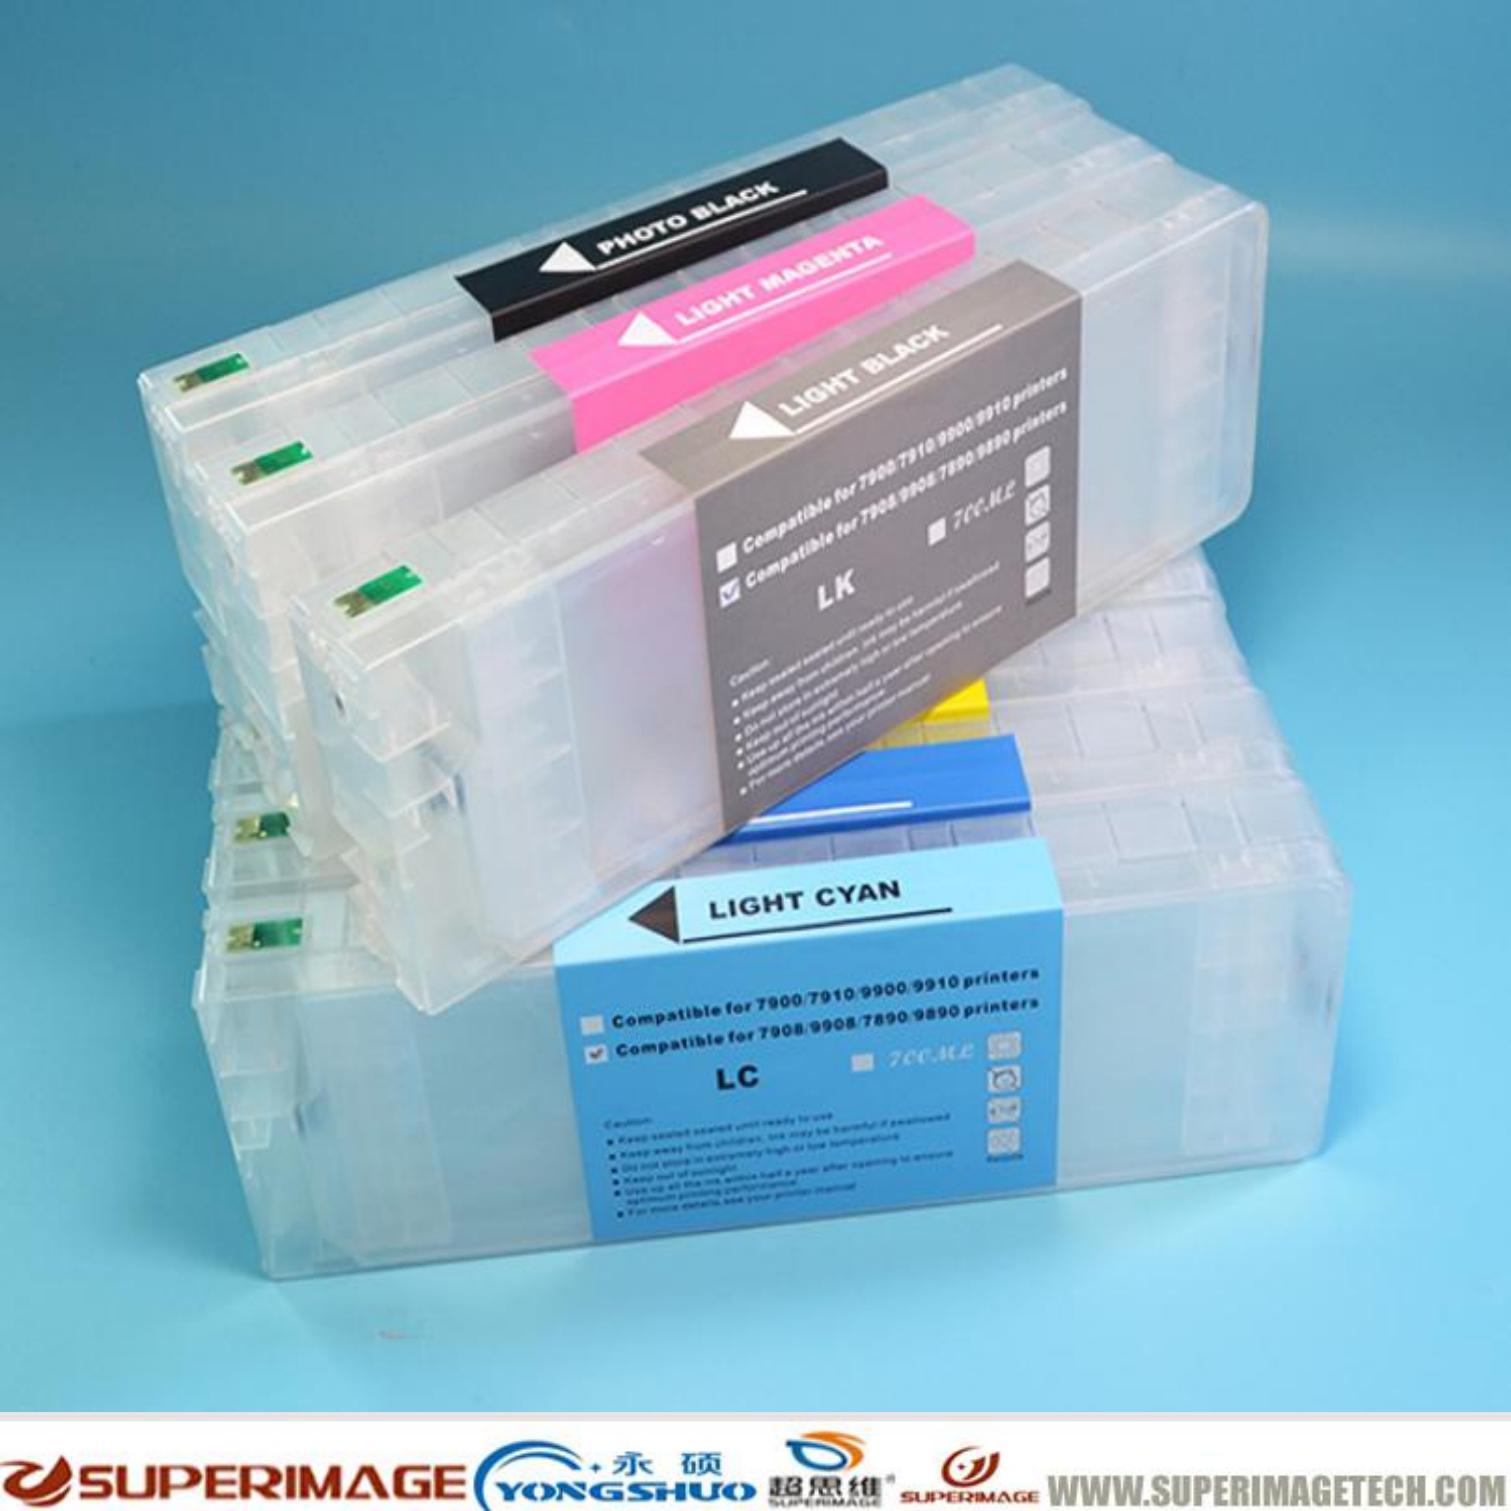 700ml Pigment Ink Cartridge for 7900/9900/7700/9700